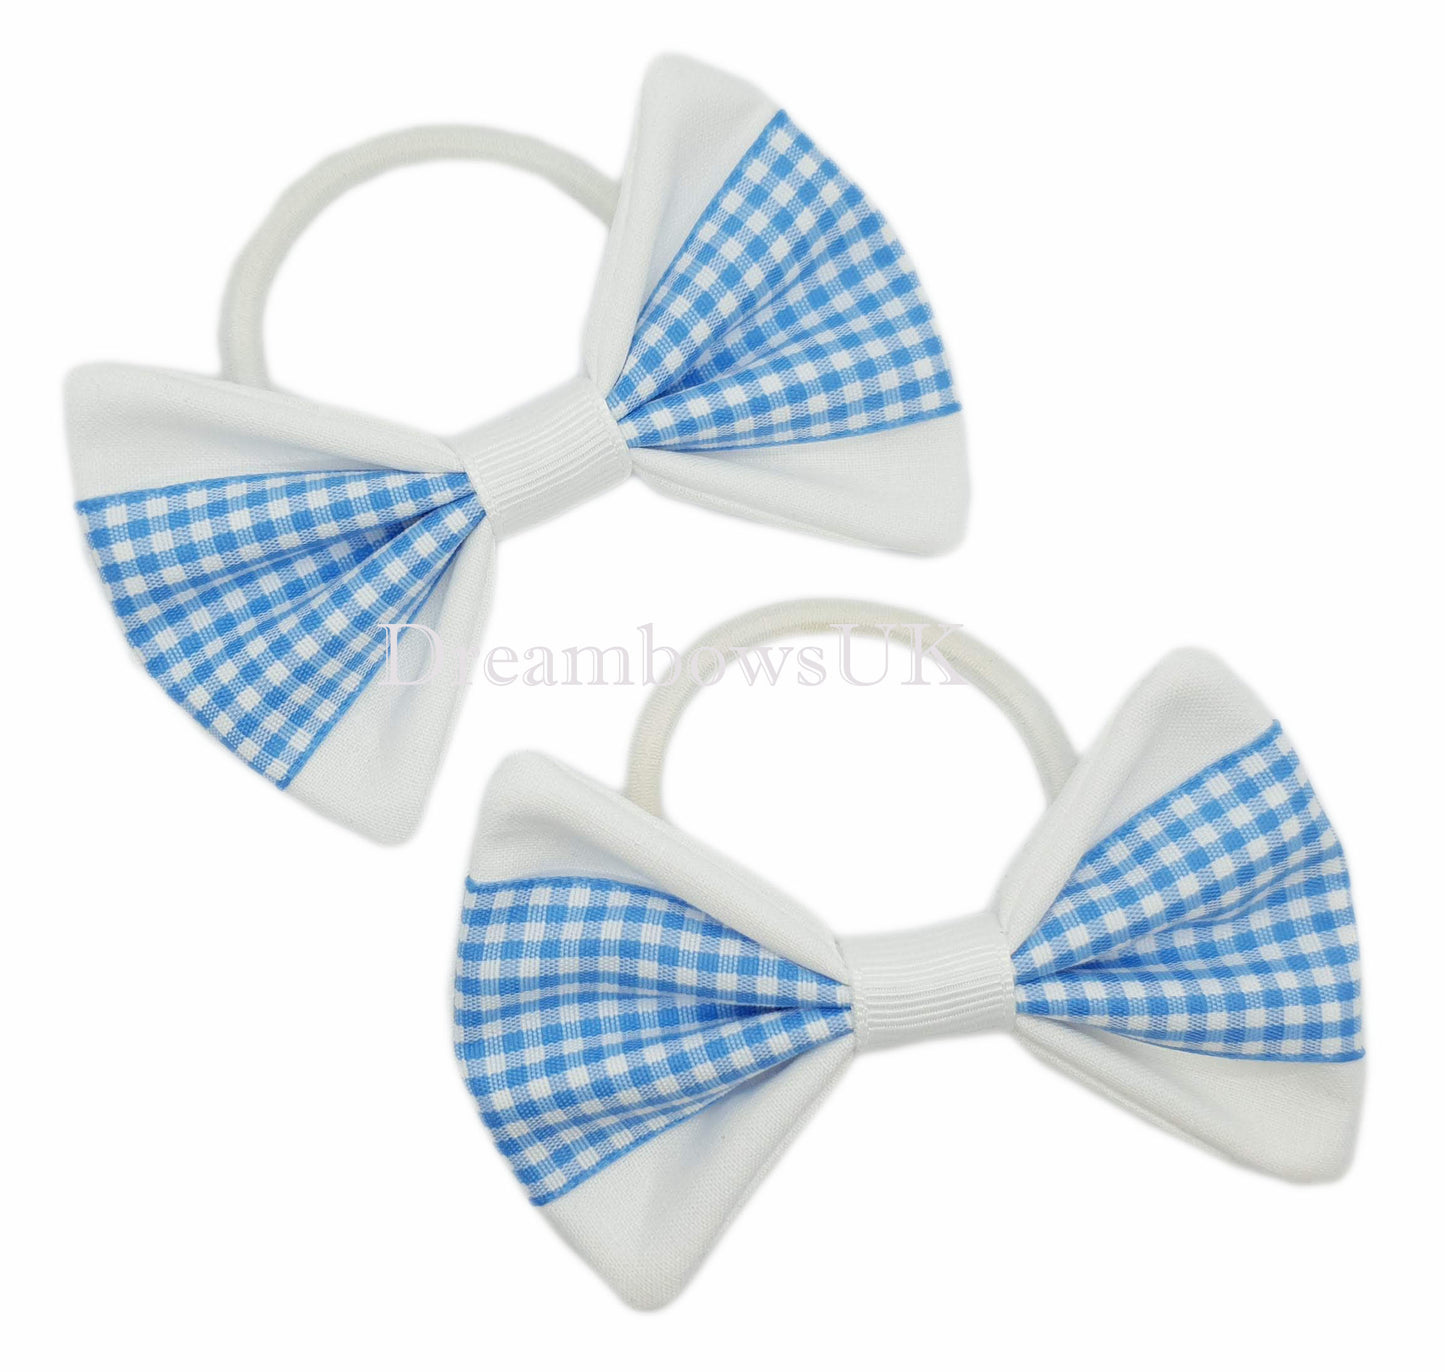 baby blue and white gingham fabric hair bows on thick elastics